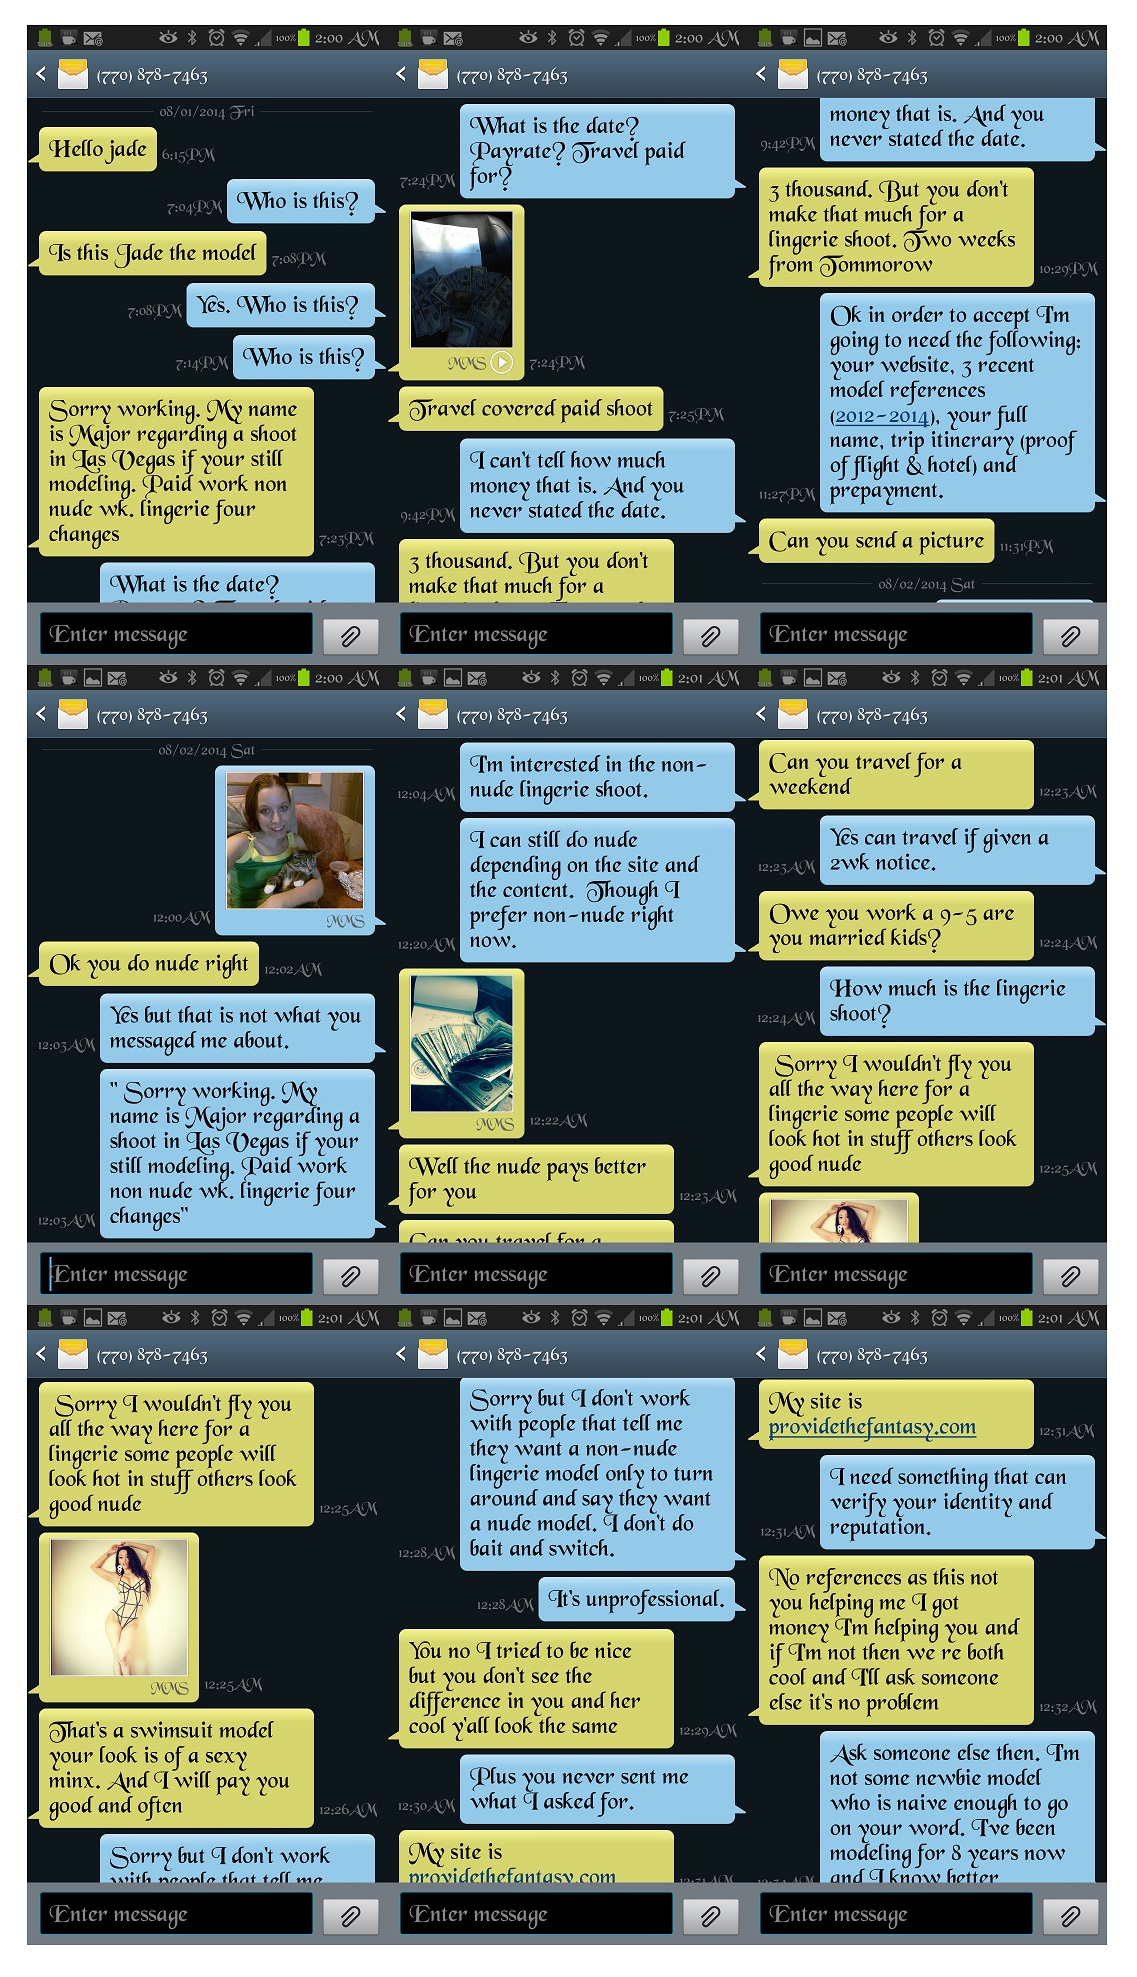 This is the whole SMS convo on one page. I hope it's not too small to read. As you can see he tried bribing me with money pics. And when he asked for a pic I sent him one of me and my cat. LOL!